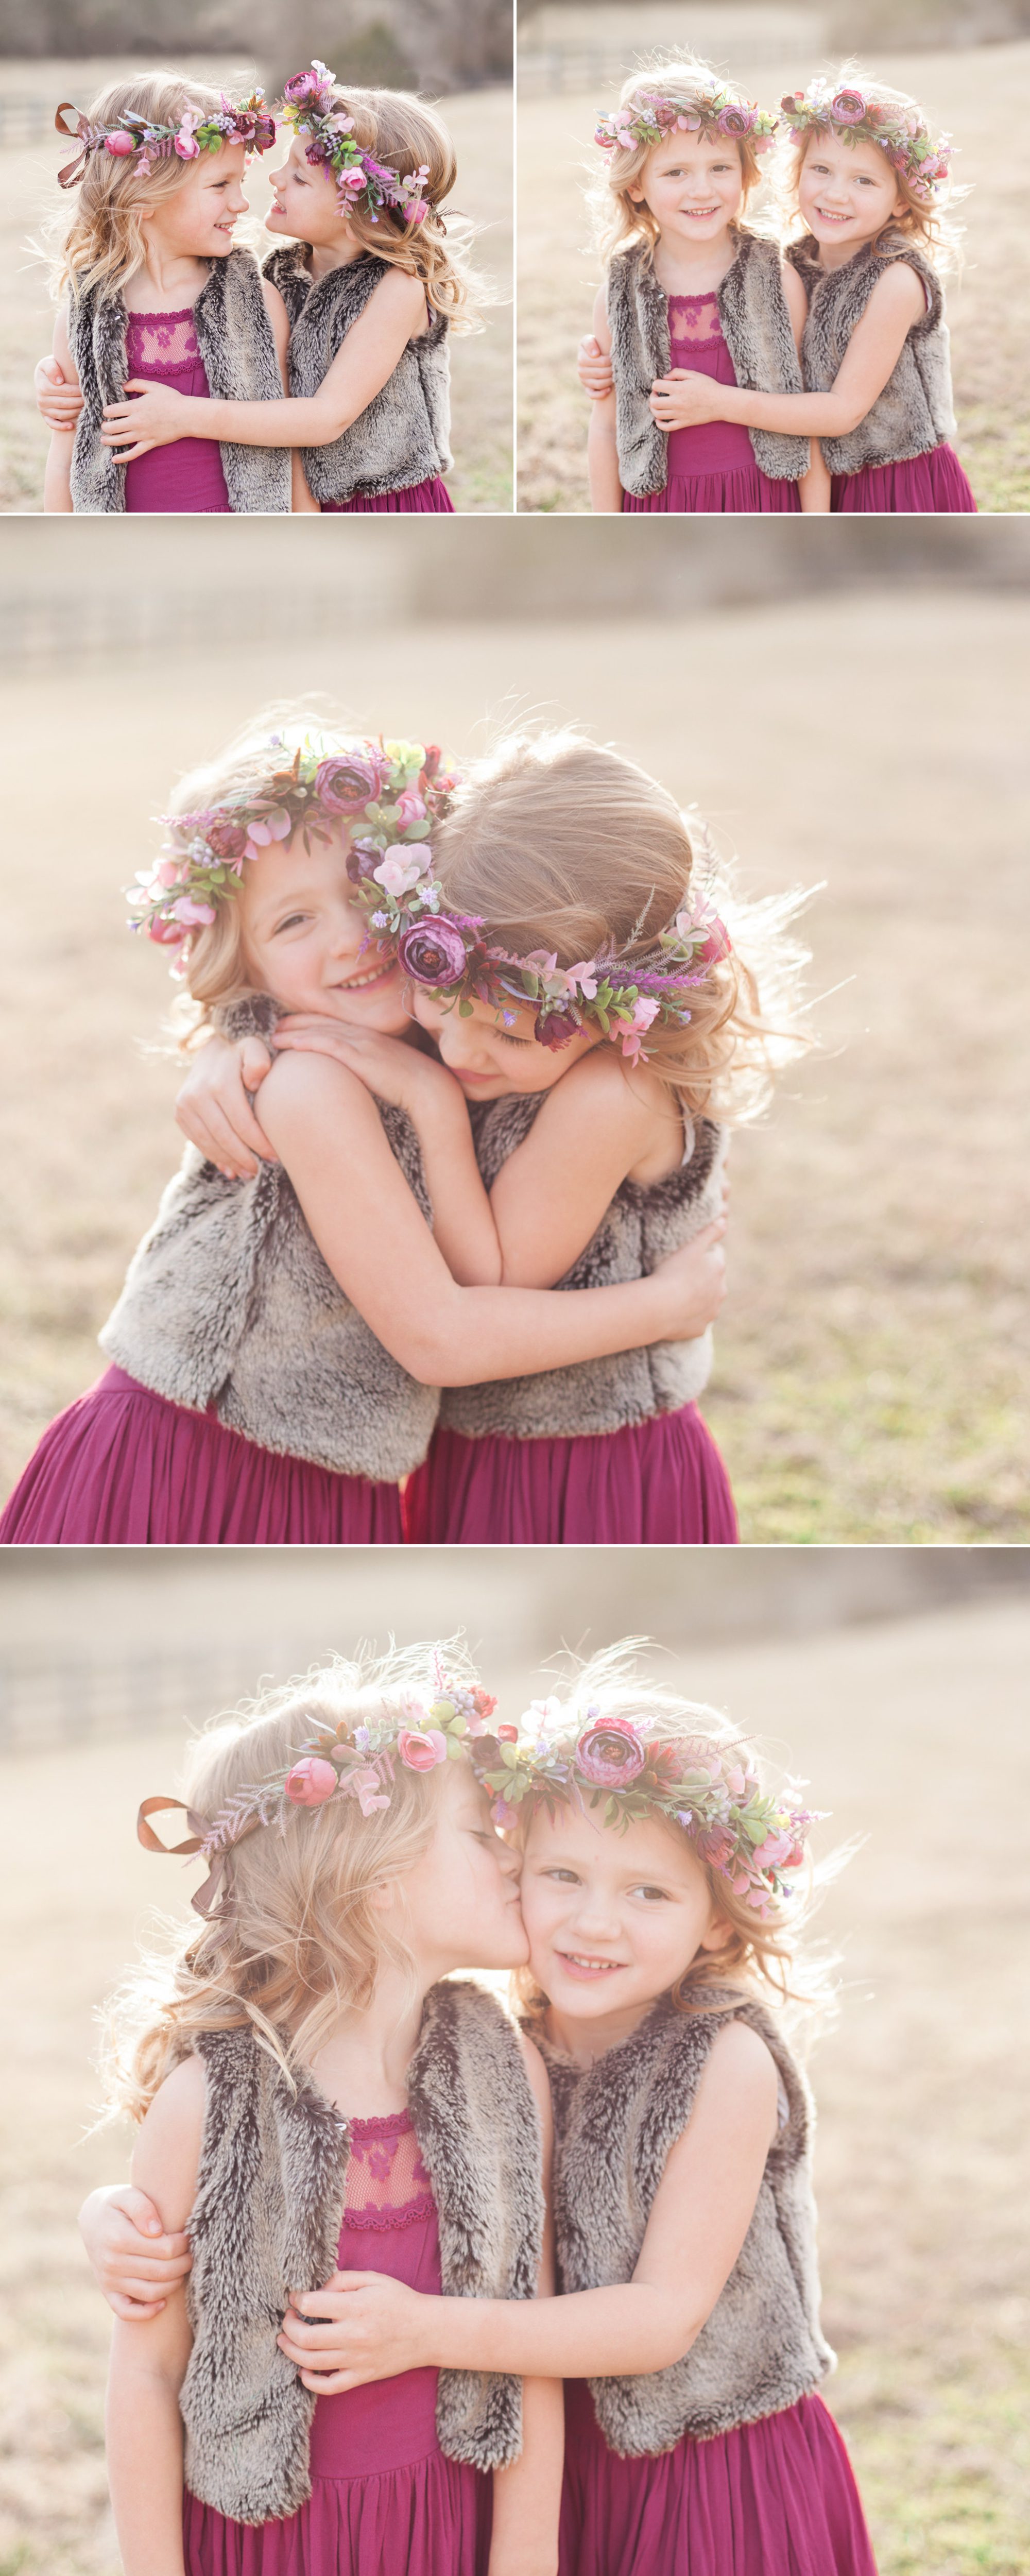 Twin Sisters at Winter Family Maternity Photo Session in Brentwood, TN. Photo by Krista Lee Photography Nashville TN